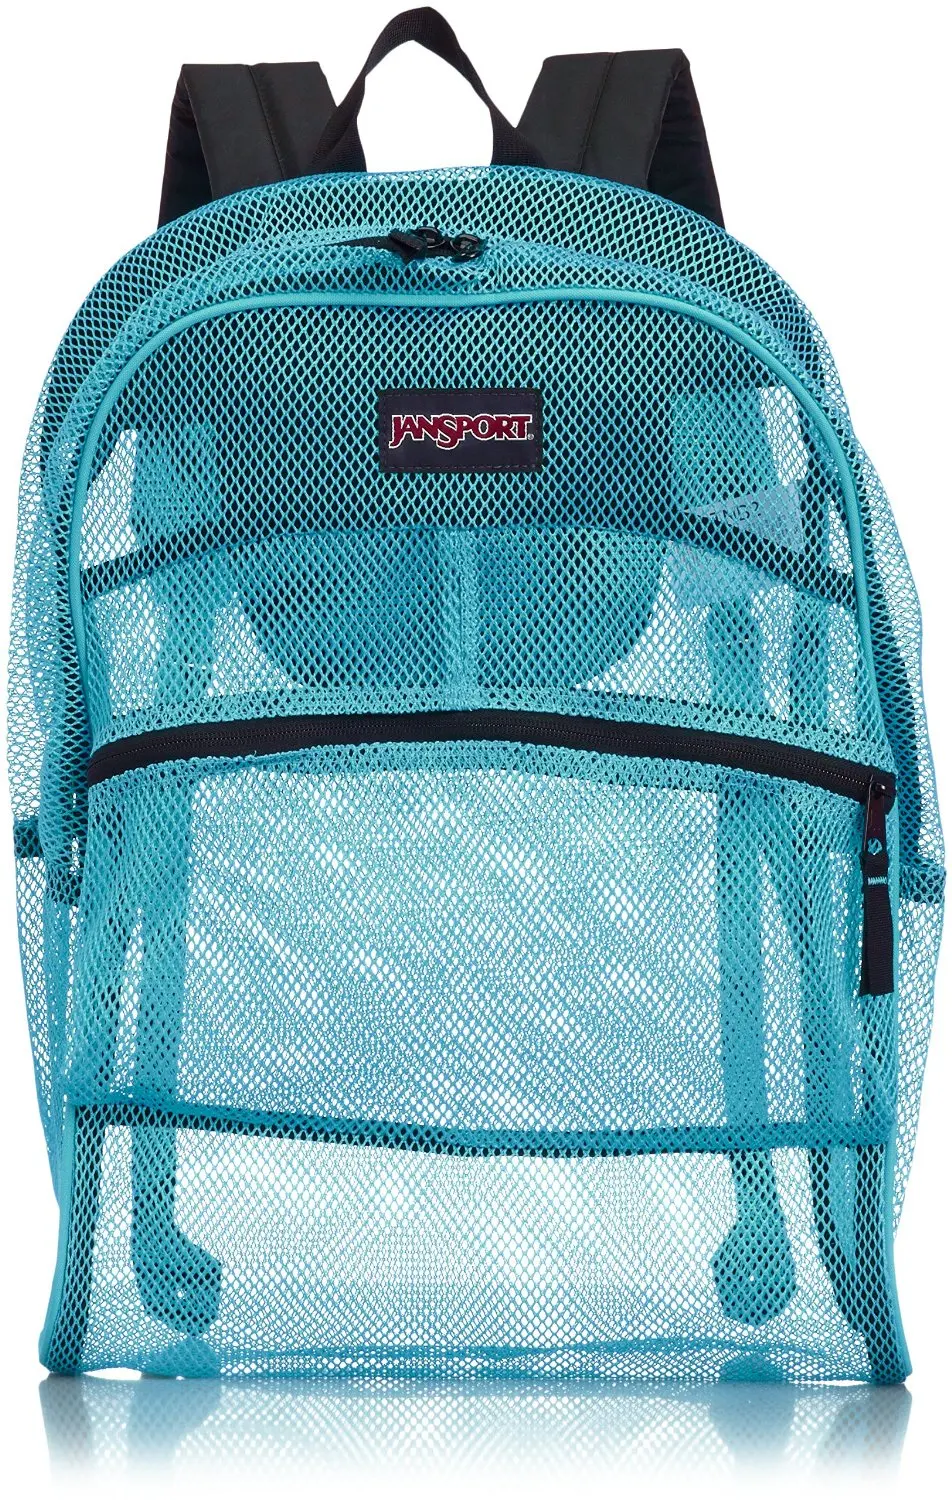 Buy Jansport Mesh Pack Backpack In Cheap Price On Alibaba Com